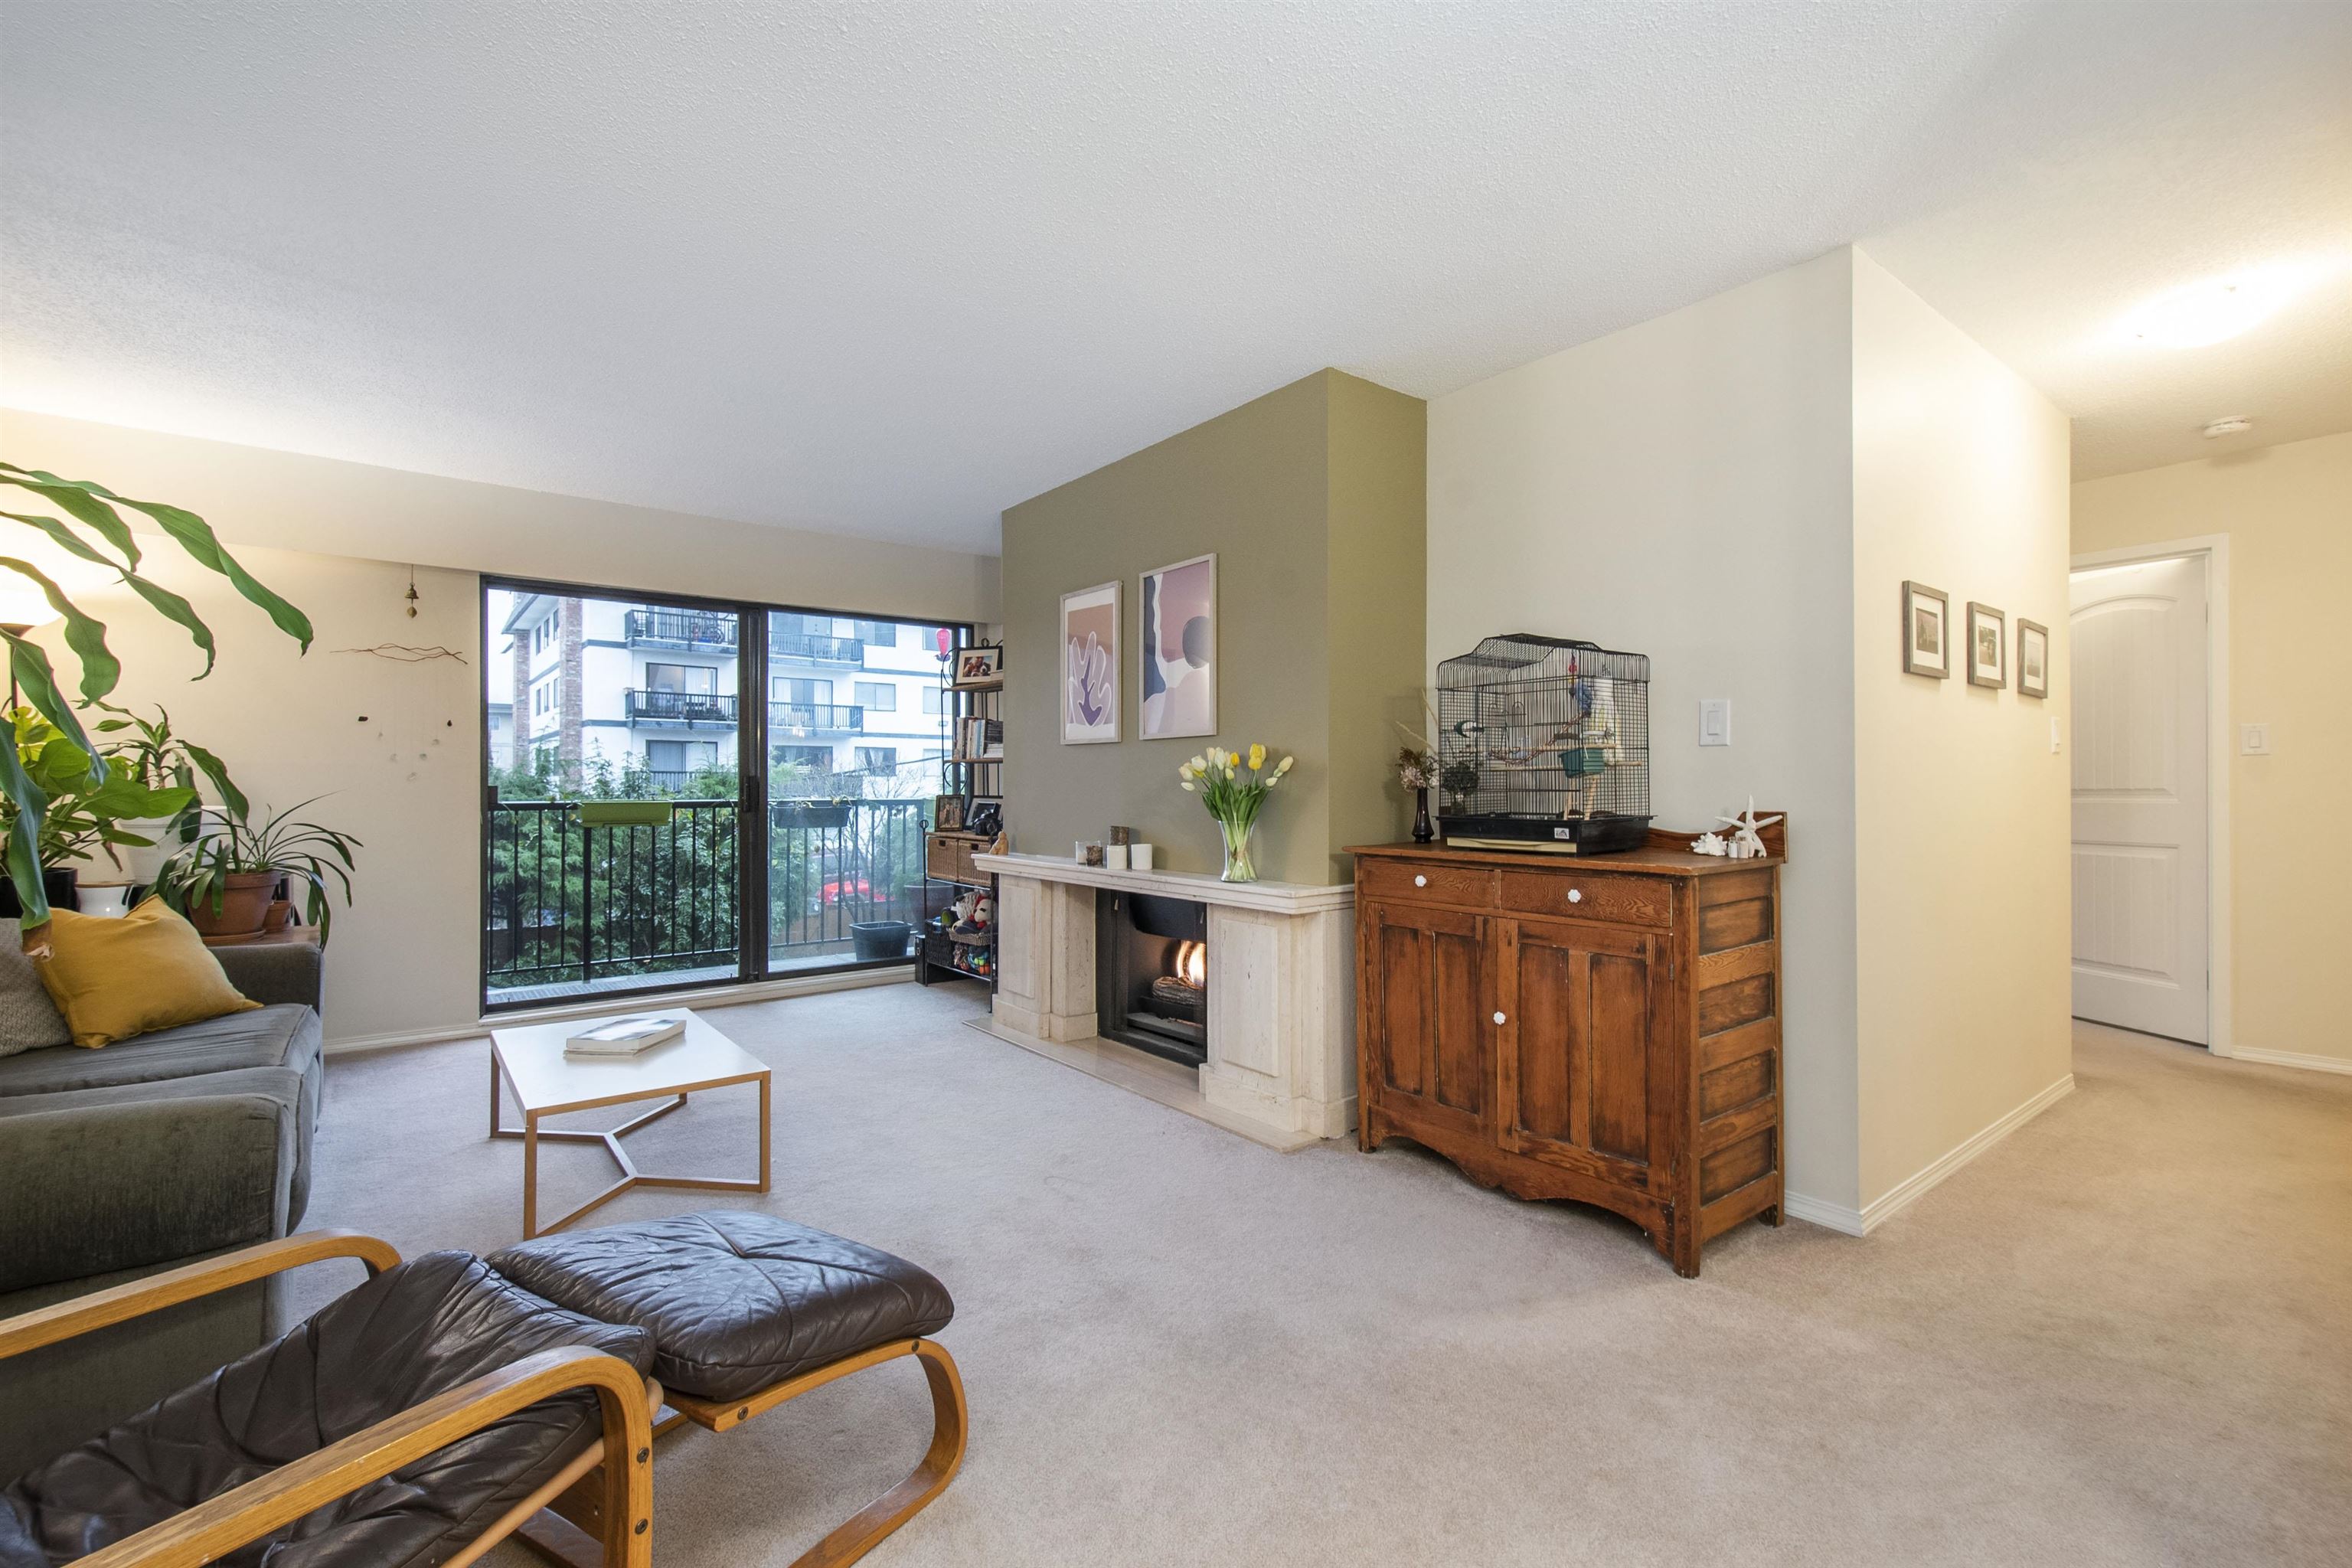 Central Lonsdale Apartment/Condo for sale:  2 bedroom 1,003 sq.ft. (Listed 6400-05-02)